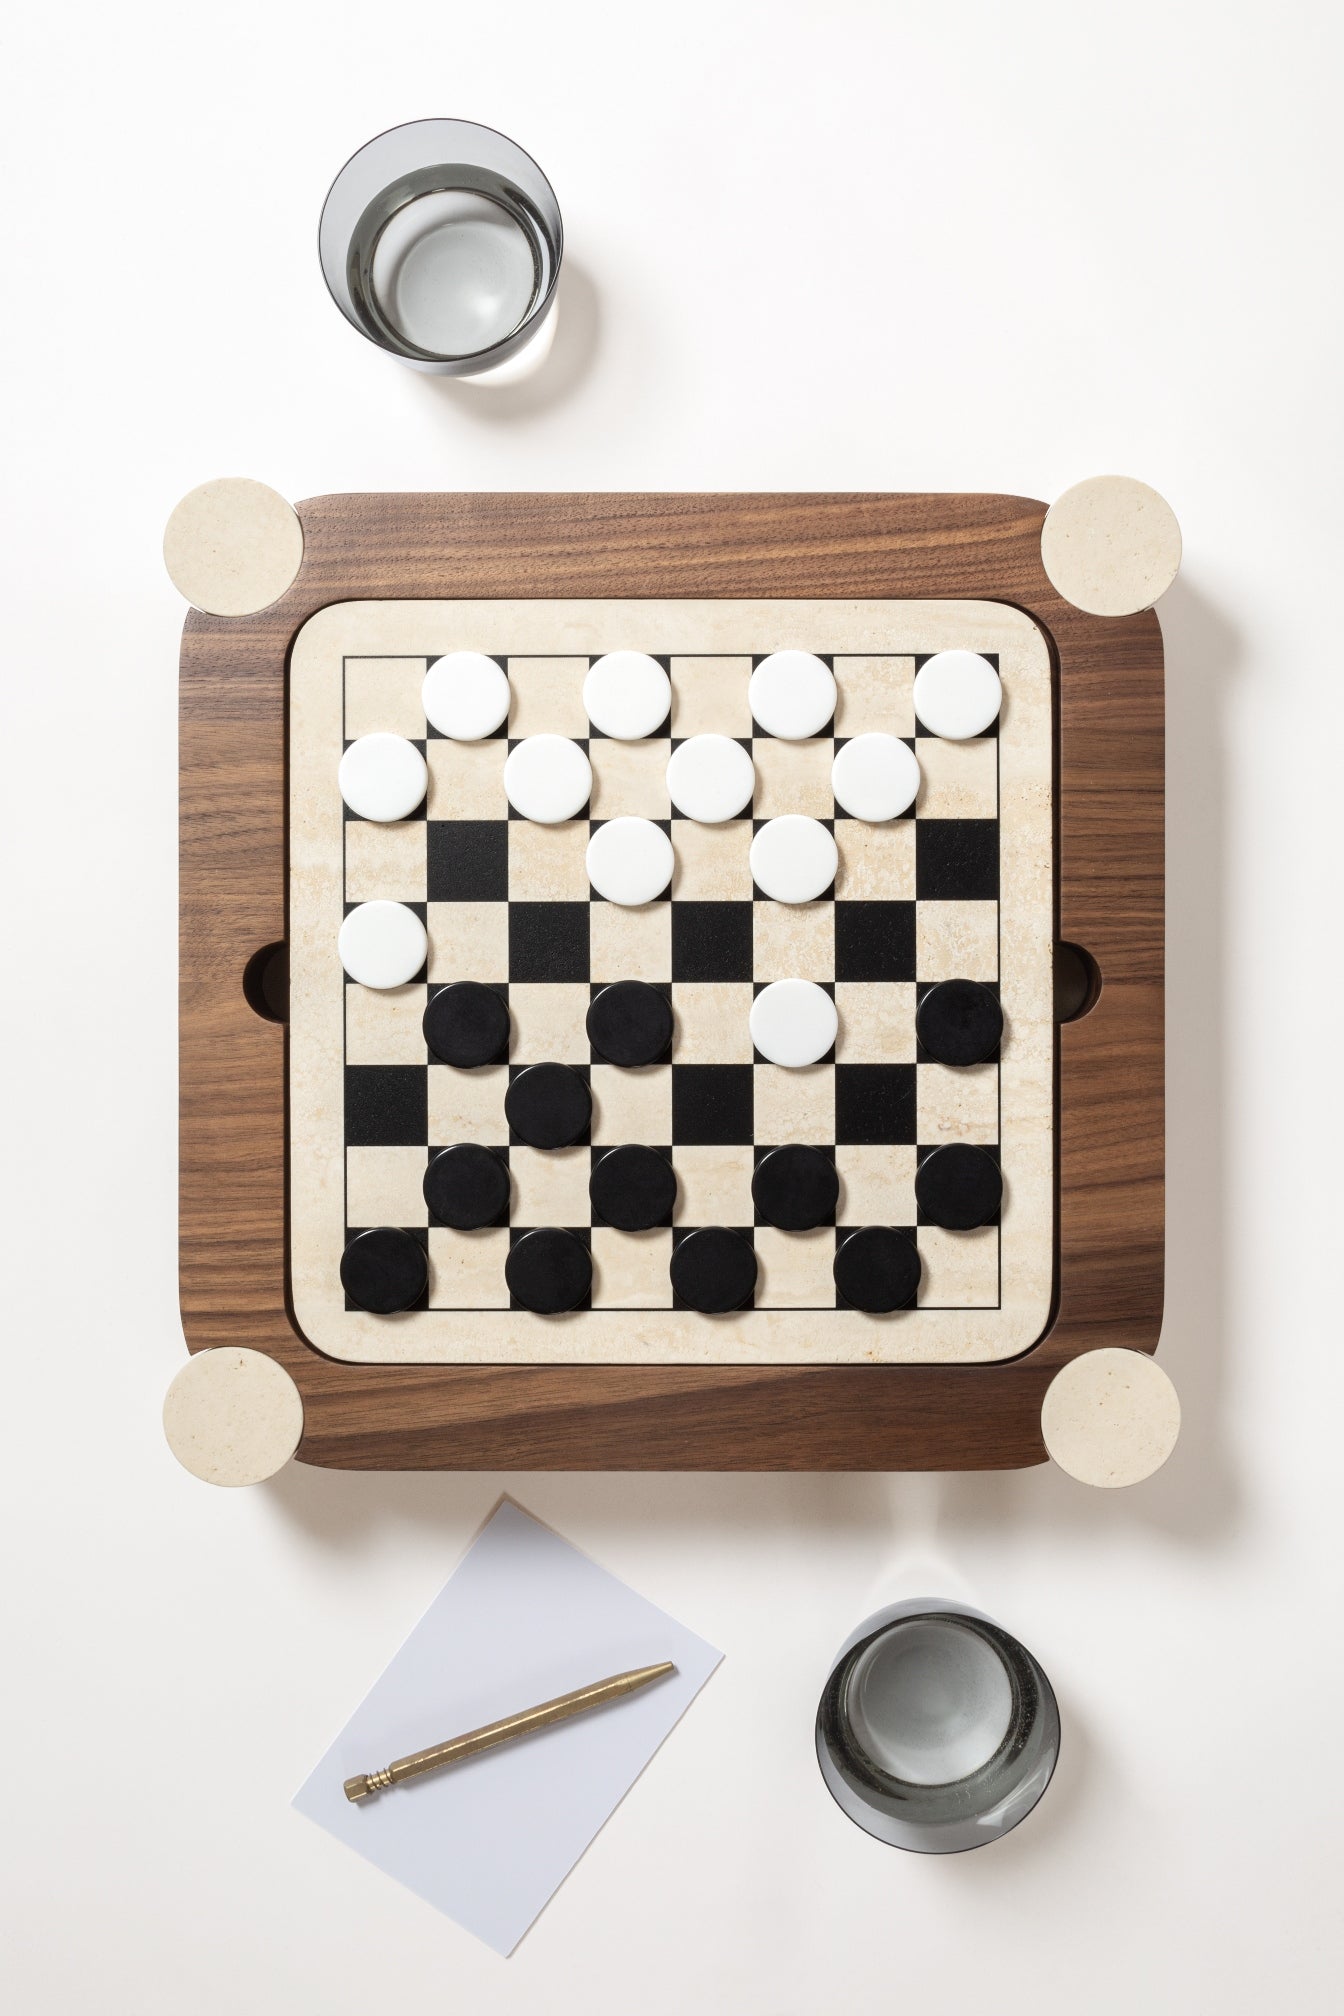 Giobagnara Mocambo Chess / Draughts Game Set | Carved Wood and Stone with Modeled, Almost Primitive Lines | Unique and Artistic Design | Explore a Range of Luxury Board Games, Classic Games, and Gift Games at 2Jour Concierge, #1 luxury high-end gift & lifestyle shop